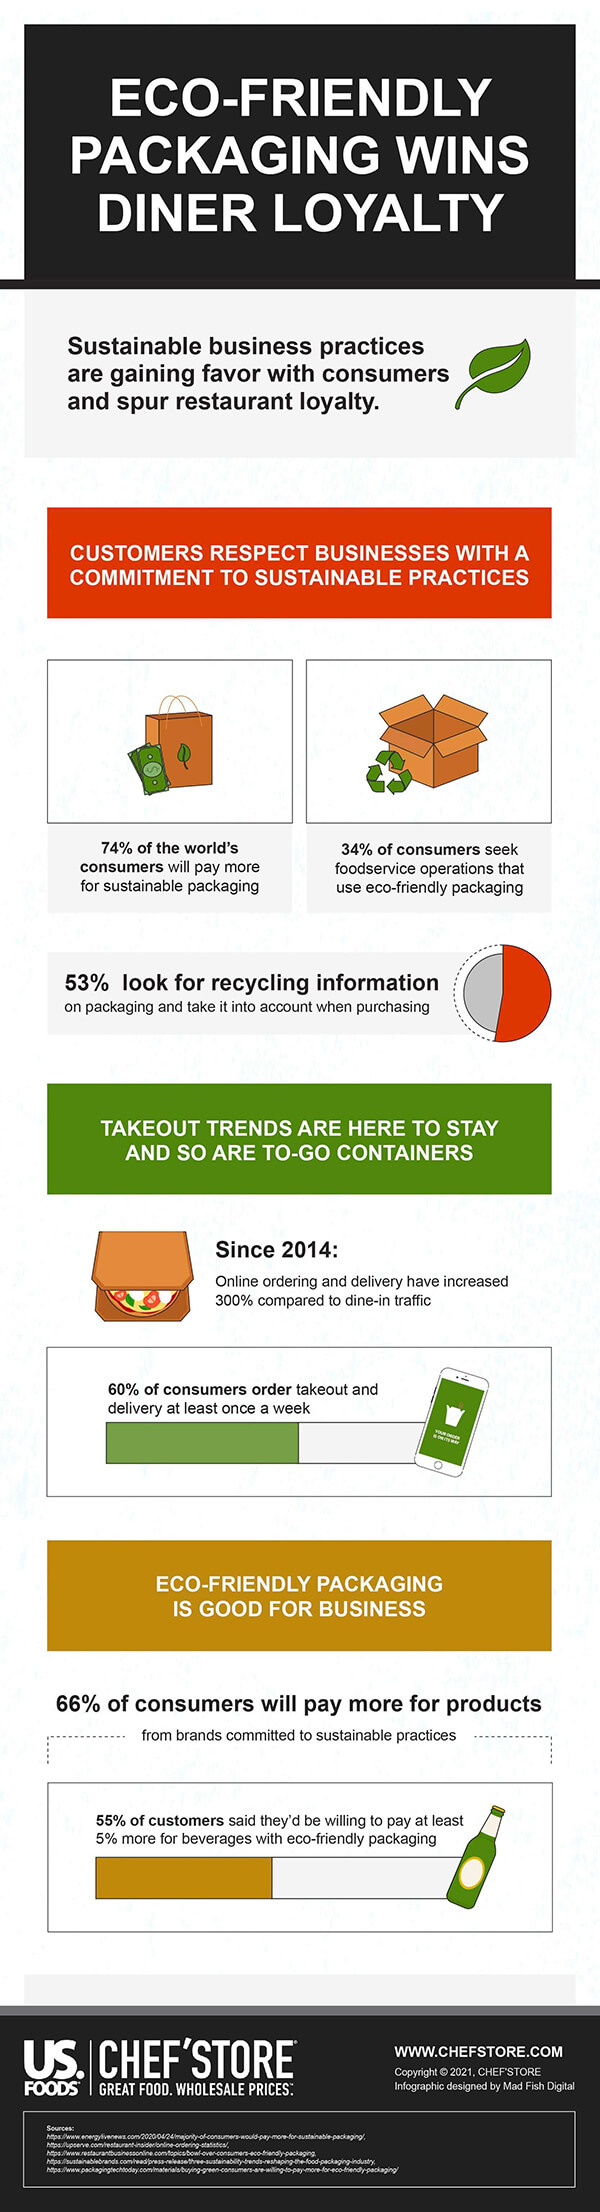 Eco-Friendly Packaging For Restaurants Infographic